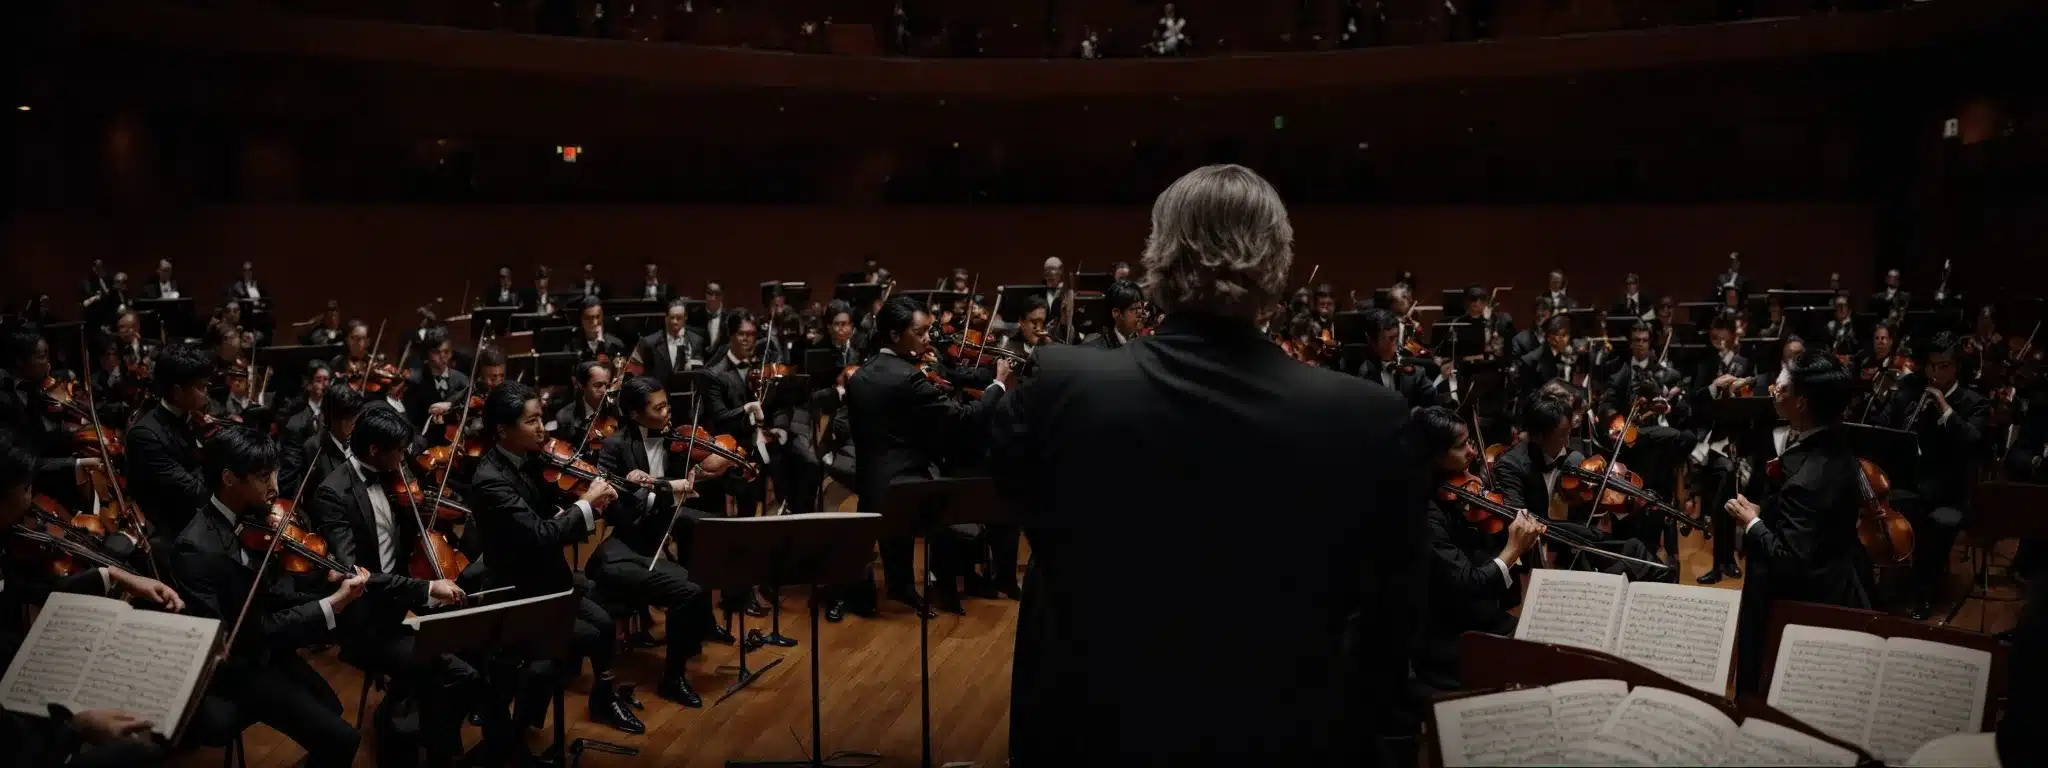 A Conductor Standing Before An Orchestra, Poised To Lead An Ensemble Through A Captivating Performance.